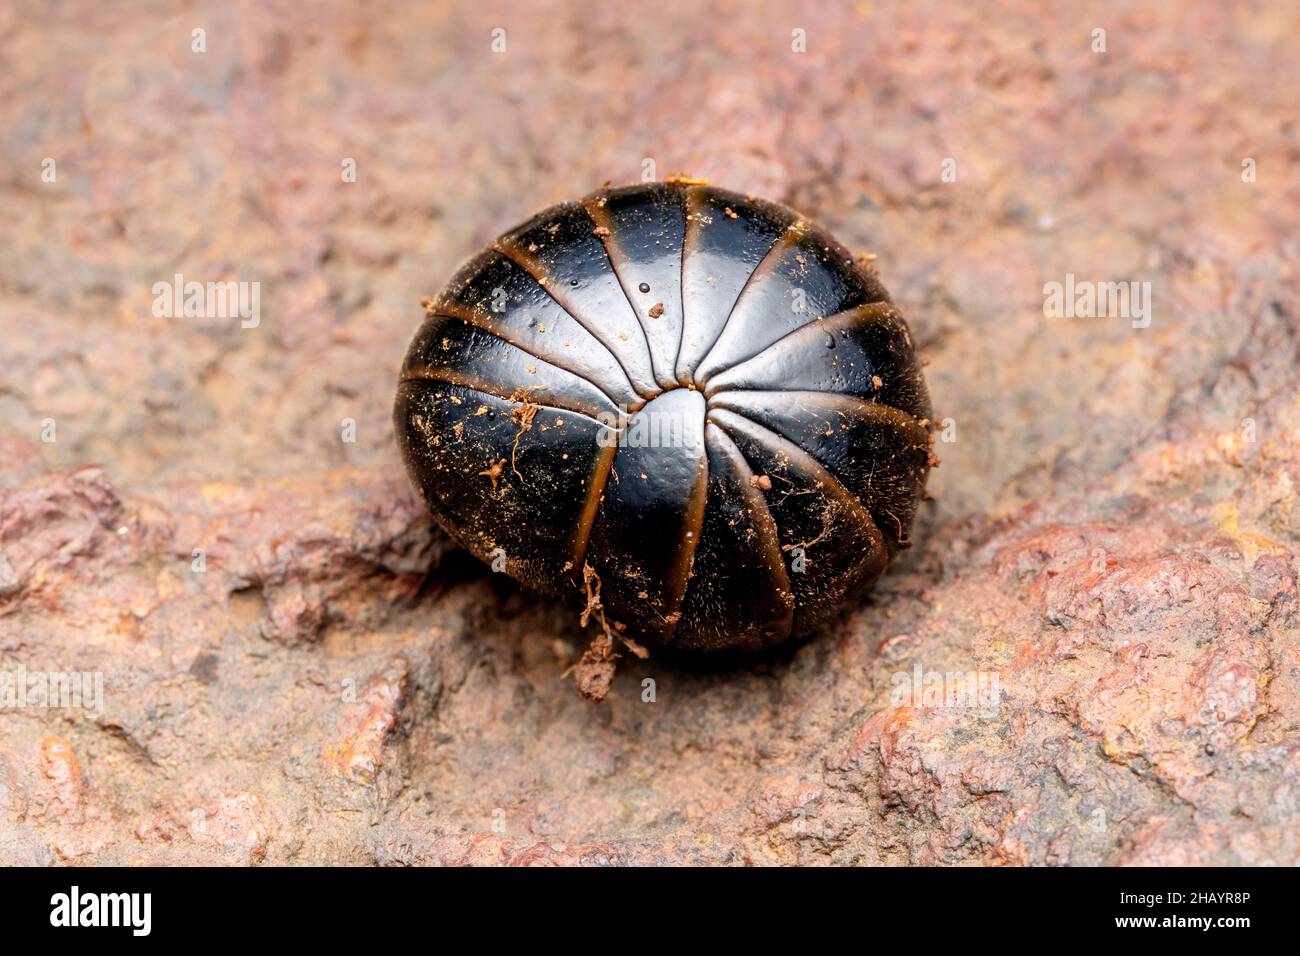 Granulatum High Resolution Stock Photography and Images - Alamy